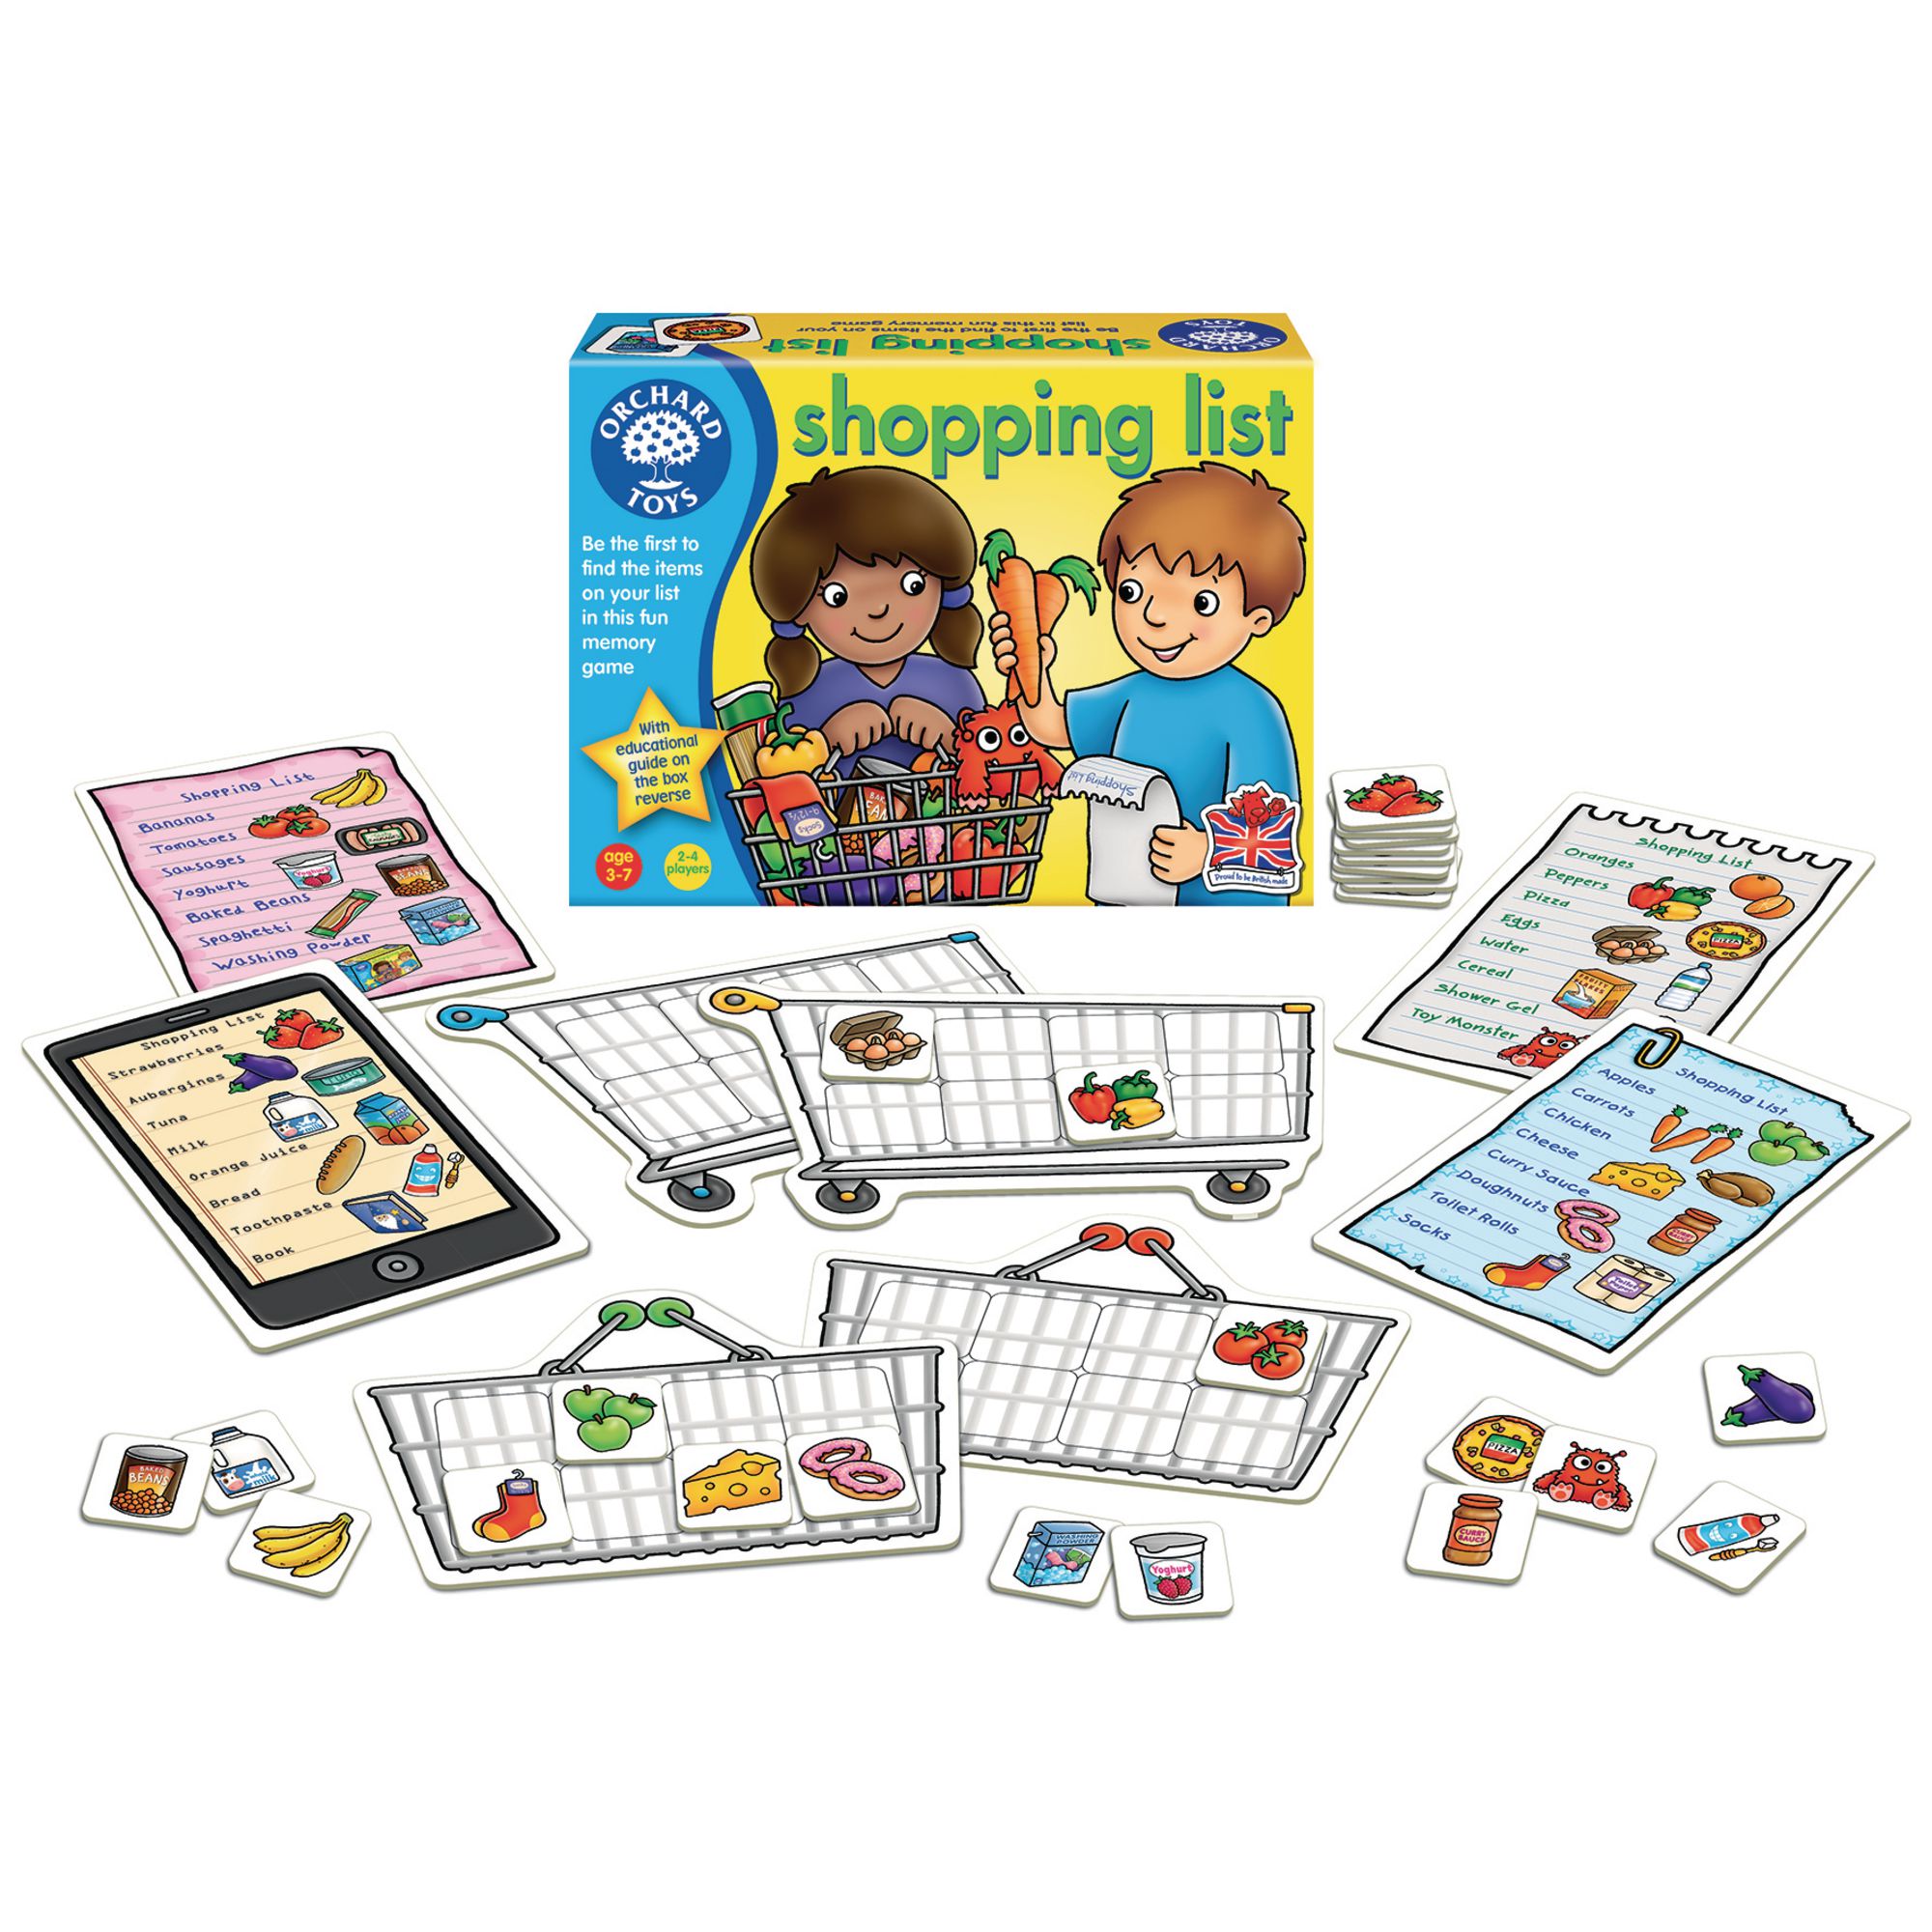 shopping-list-game-he1553291-findel-education